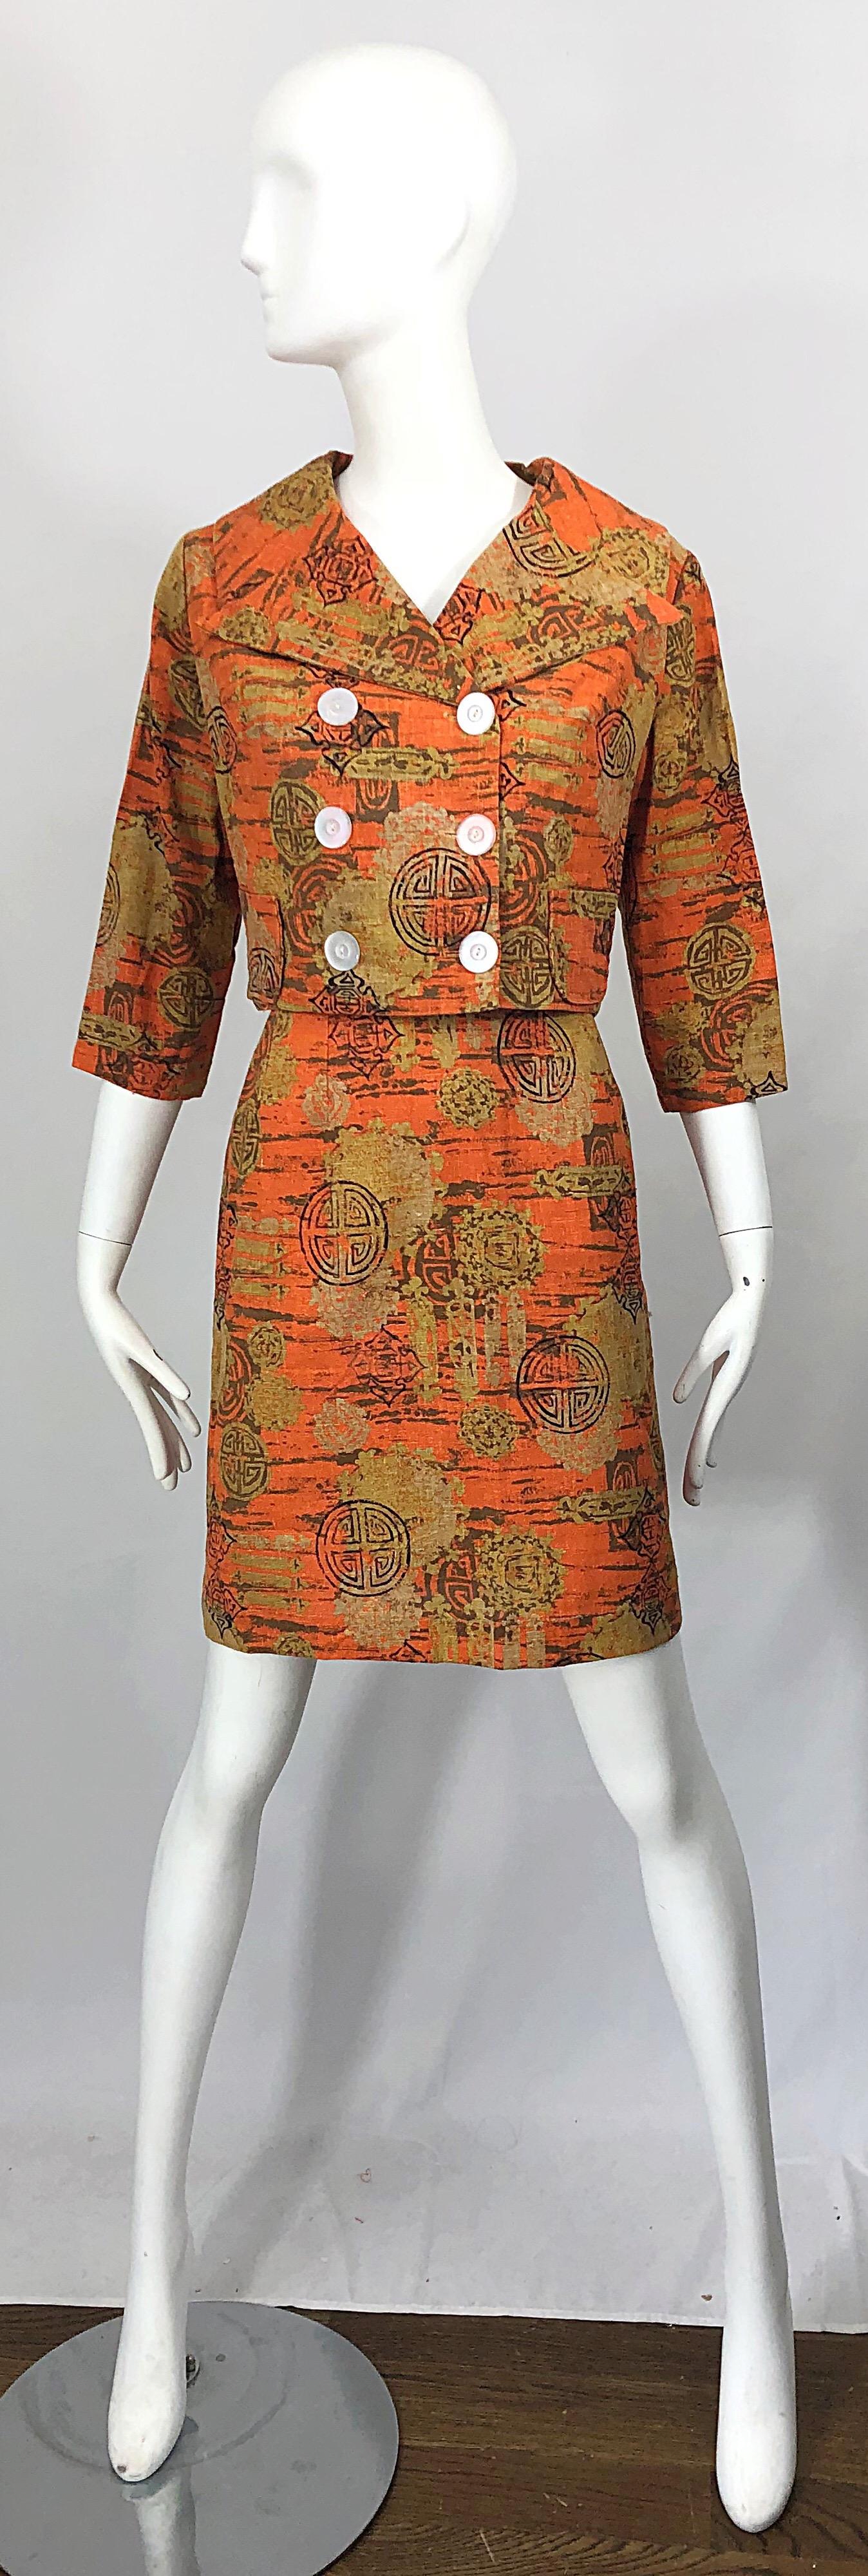 Chic 1960s abstract Asian batik print linen skirt suit! Features warm colors of burnt orange and tan throughout. Pillbox style jacket is double breasted, cropped and has 3/4 sleeves. Clear buttons and pockets at each side of the waist on the jacket.